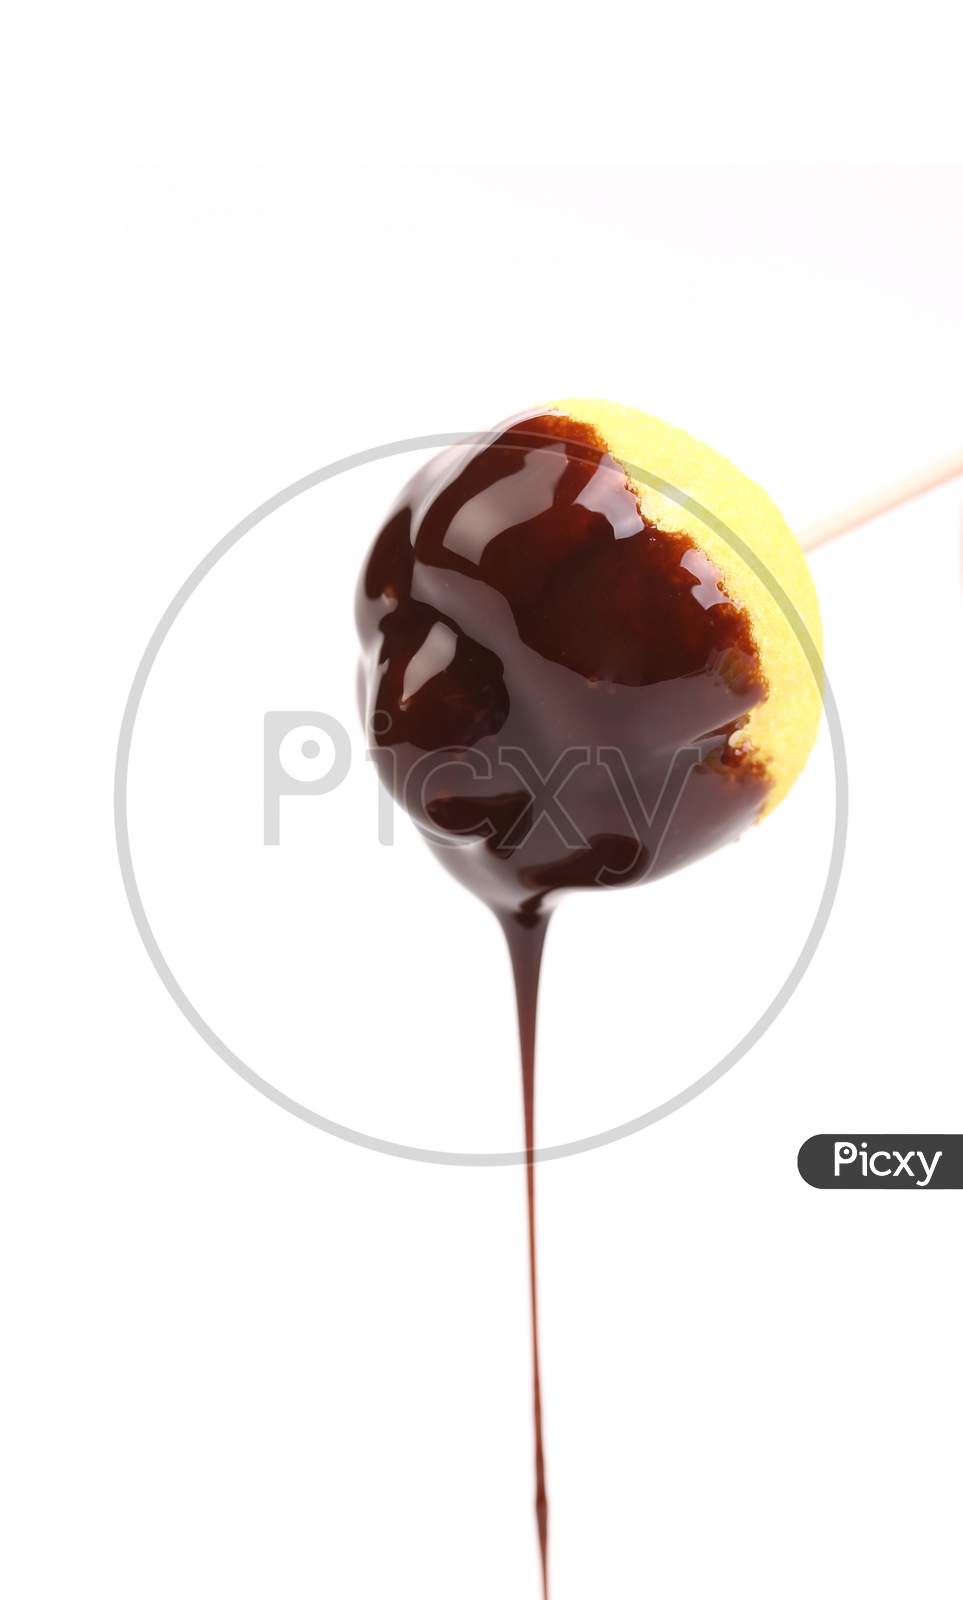 Marshmallow With Chocolate Dripping. Isolated On A White Background.